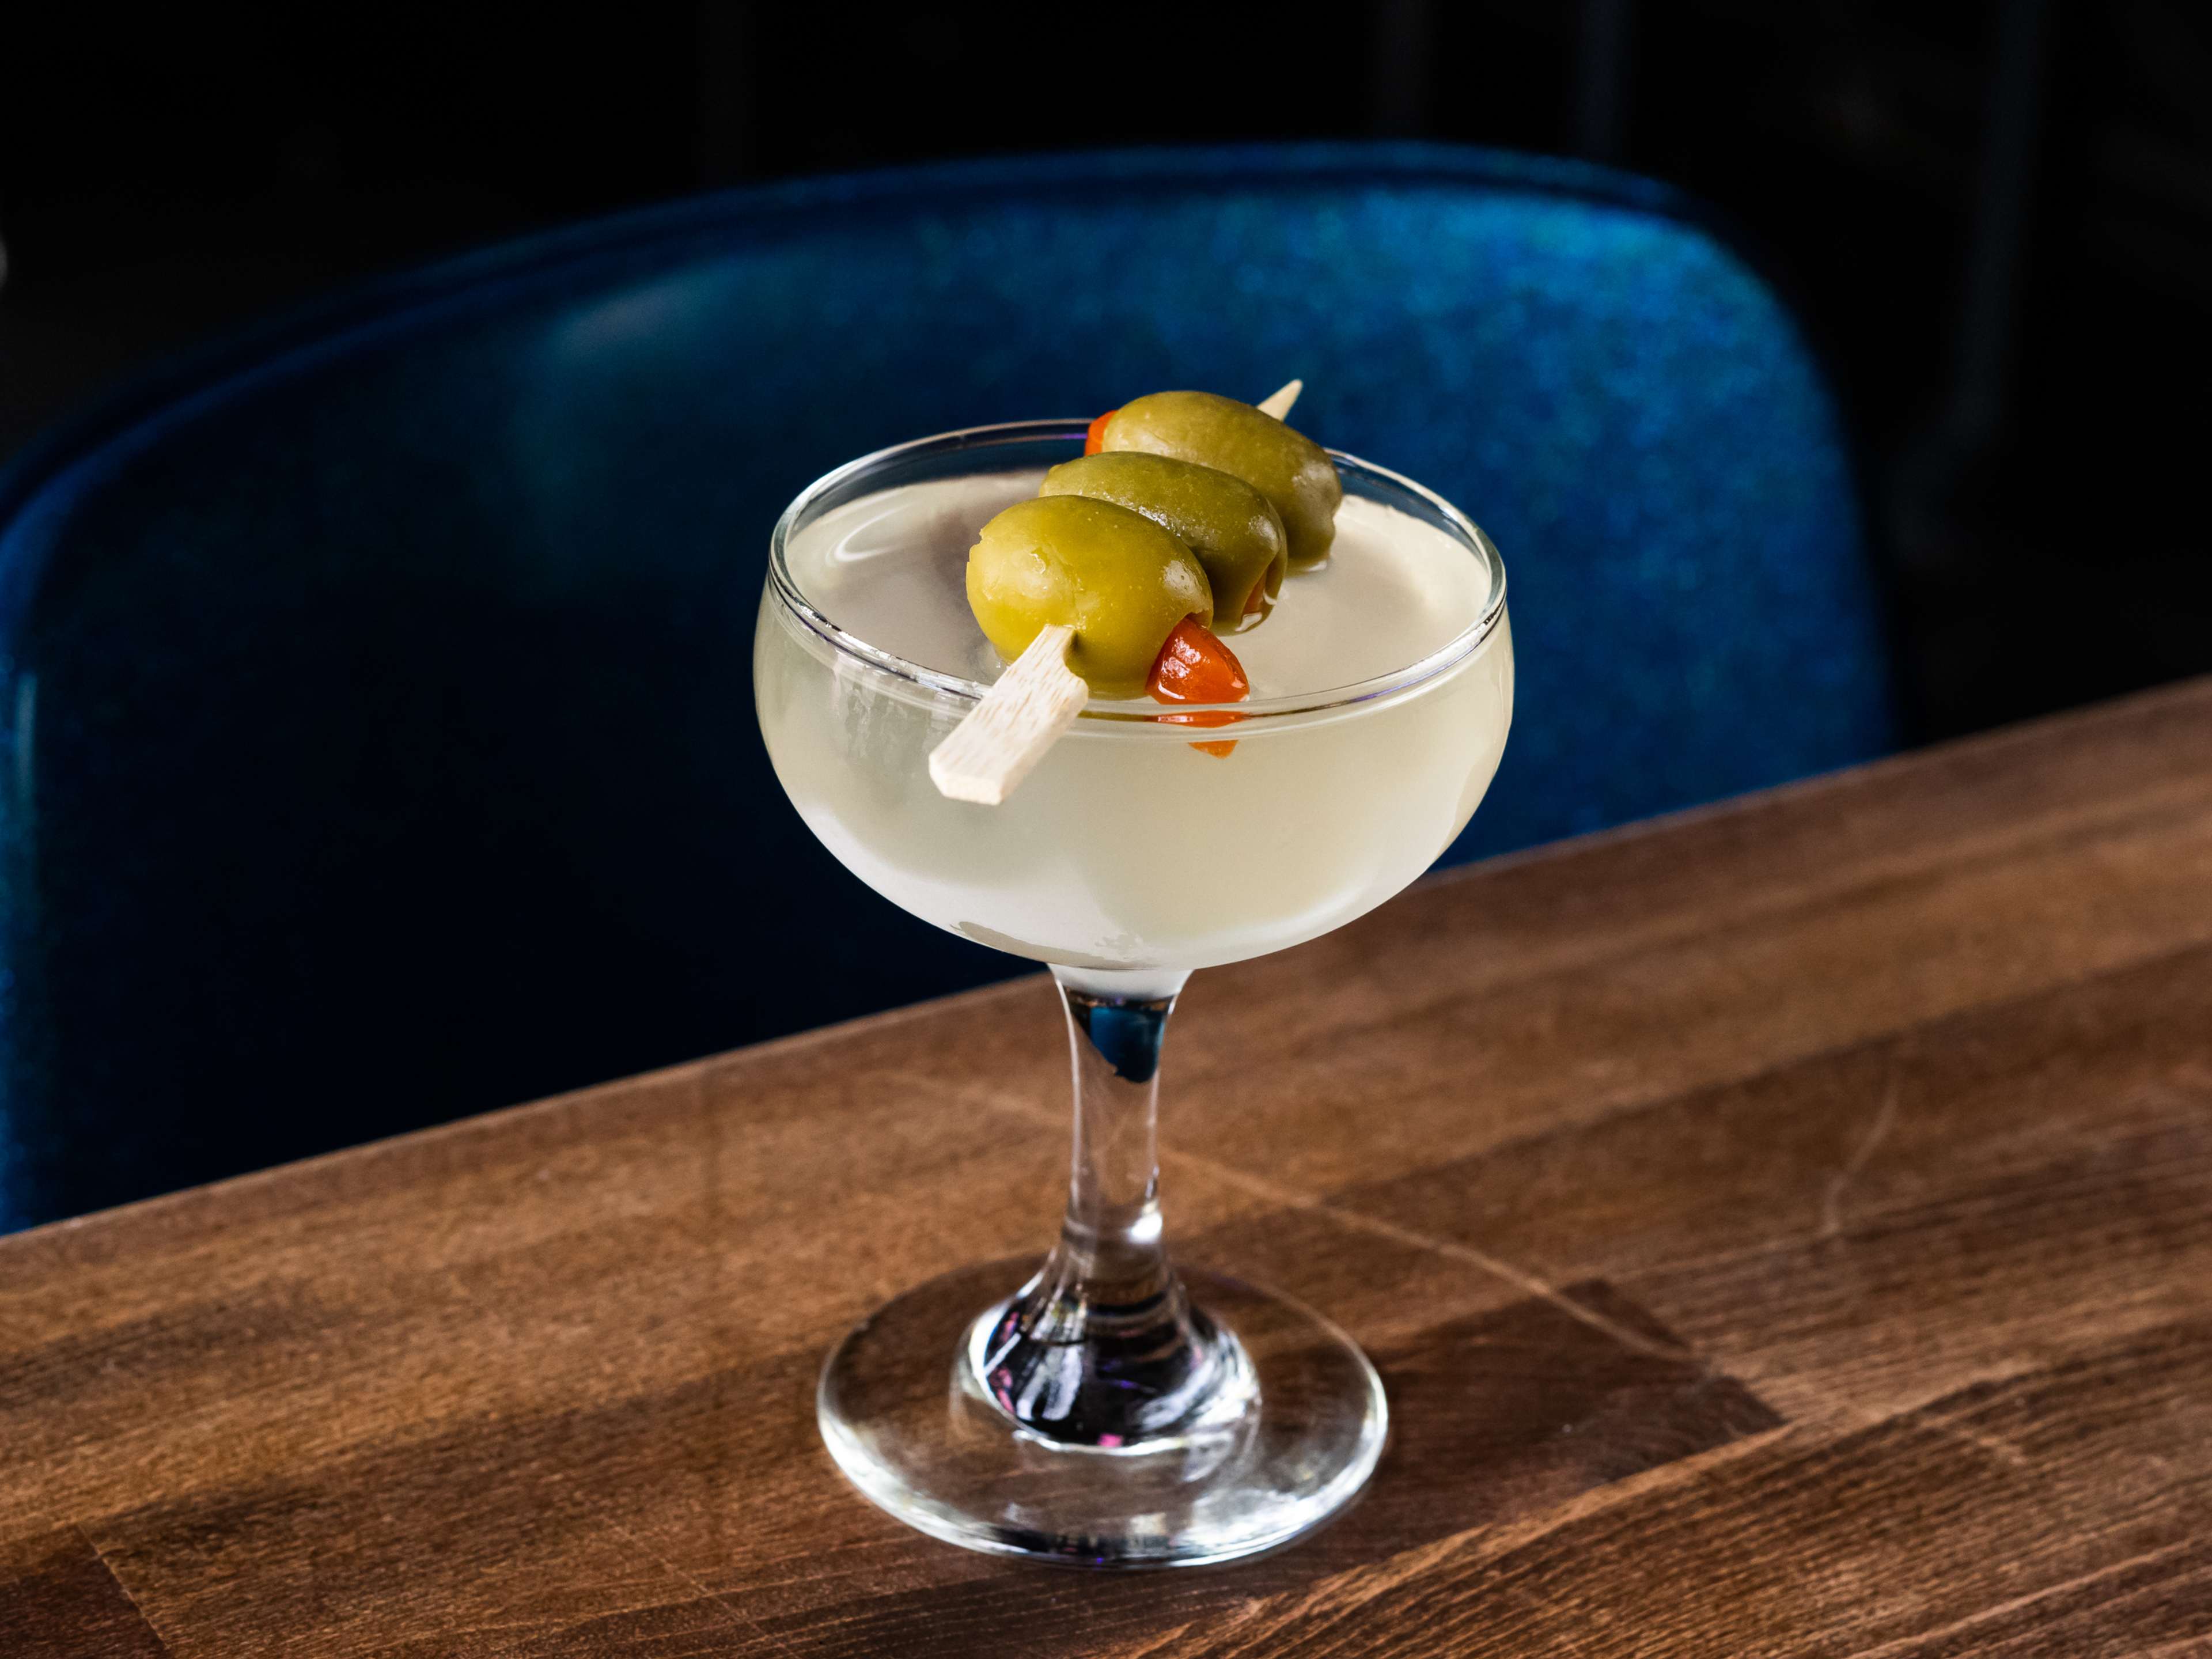 A martini with olives.